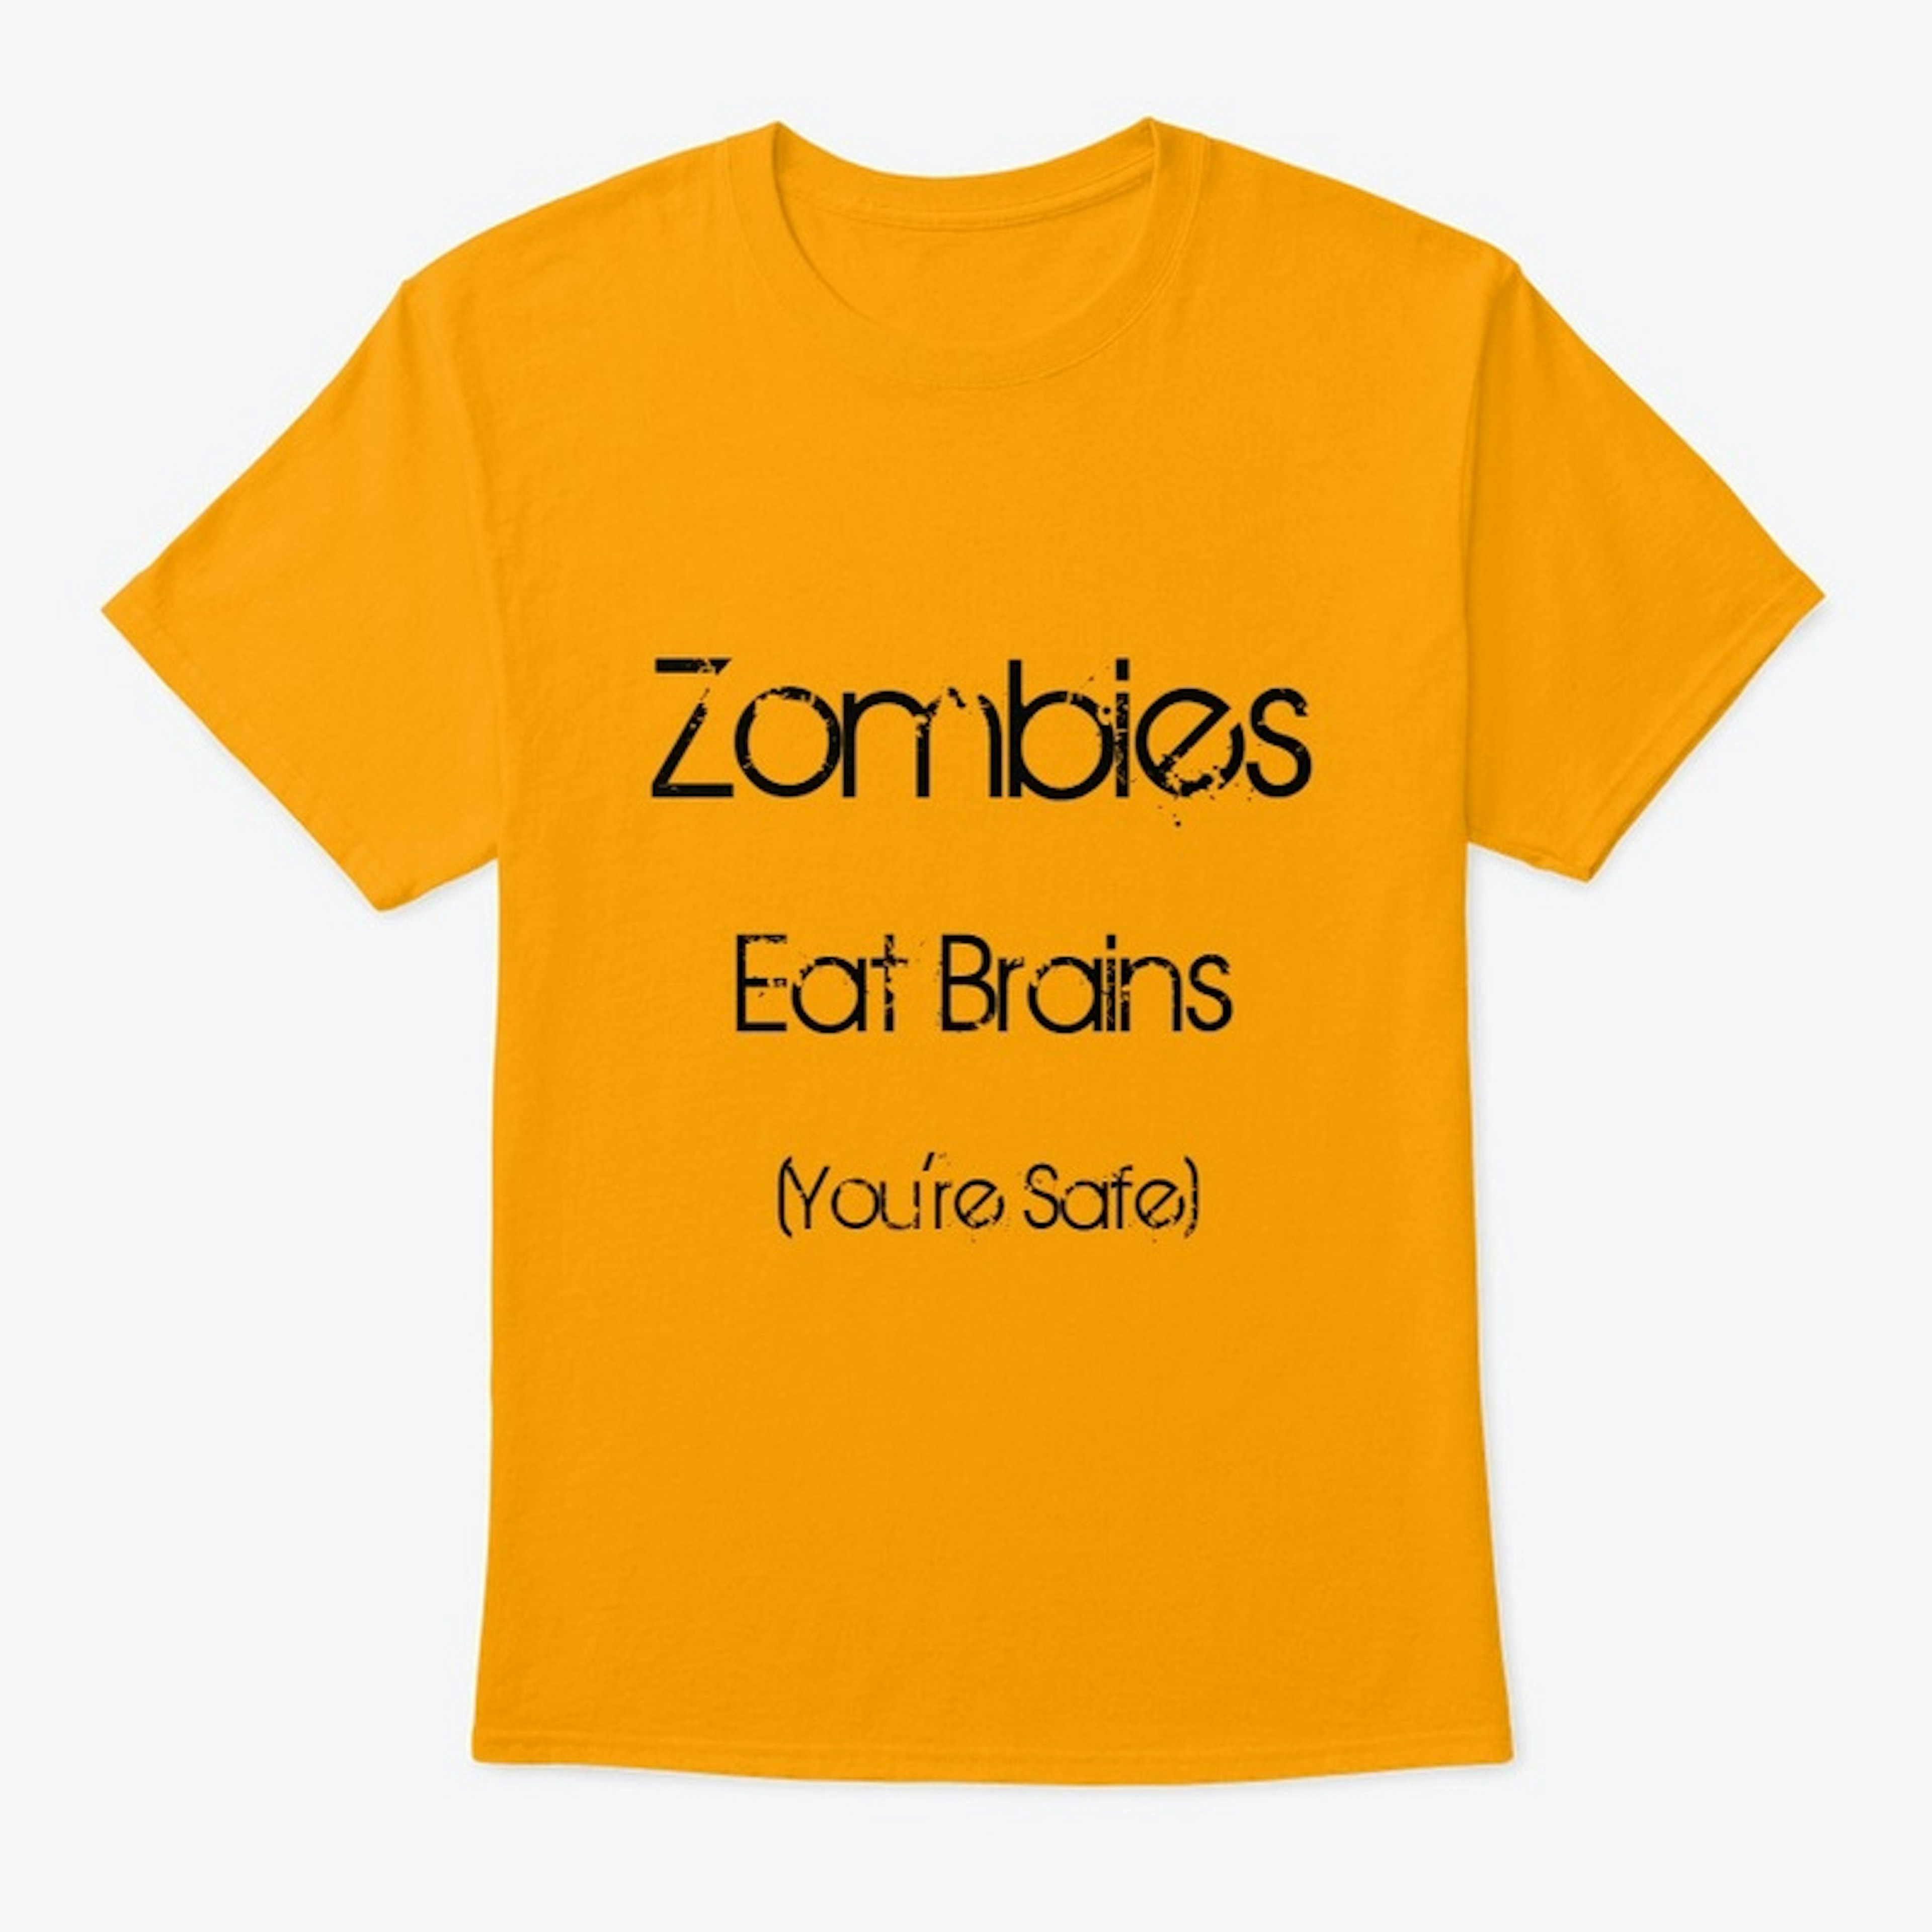 Zombies Eat Brains (Your Safe)